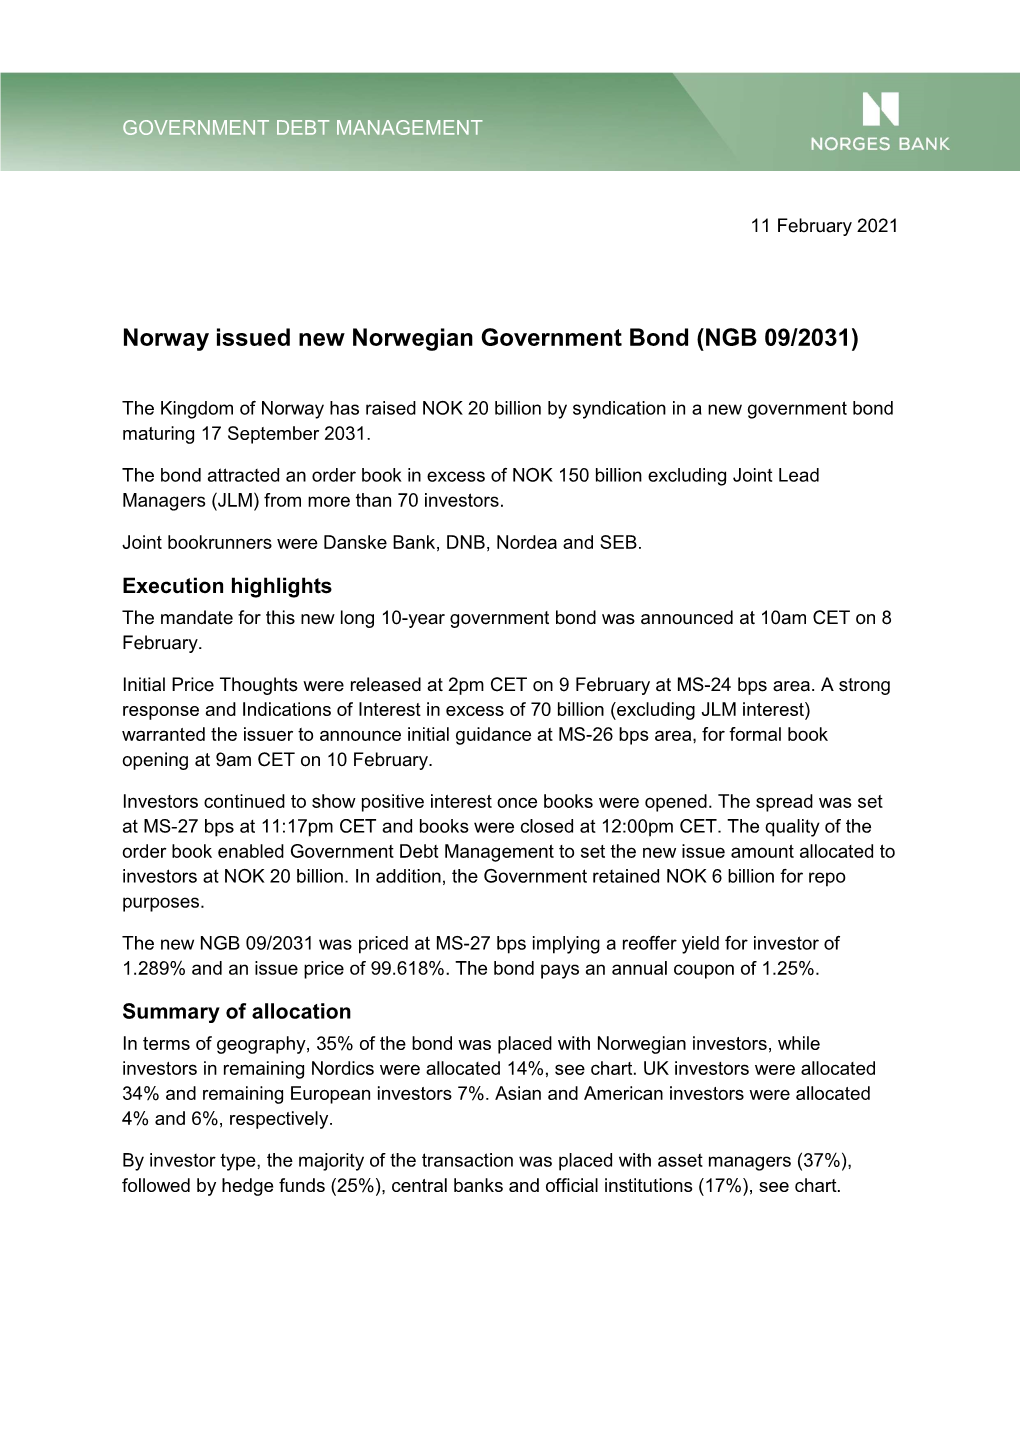 Norway Issued New Norwegian Government Bond (NGB 09/2031)